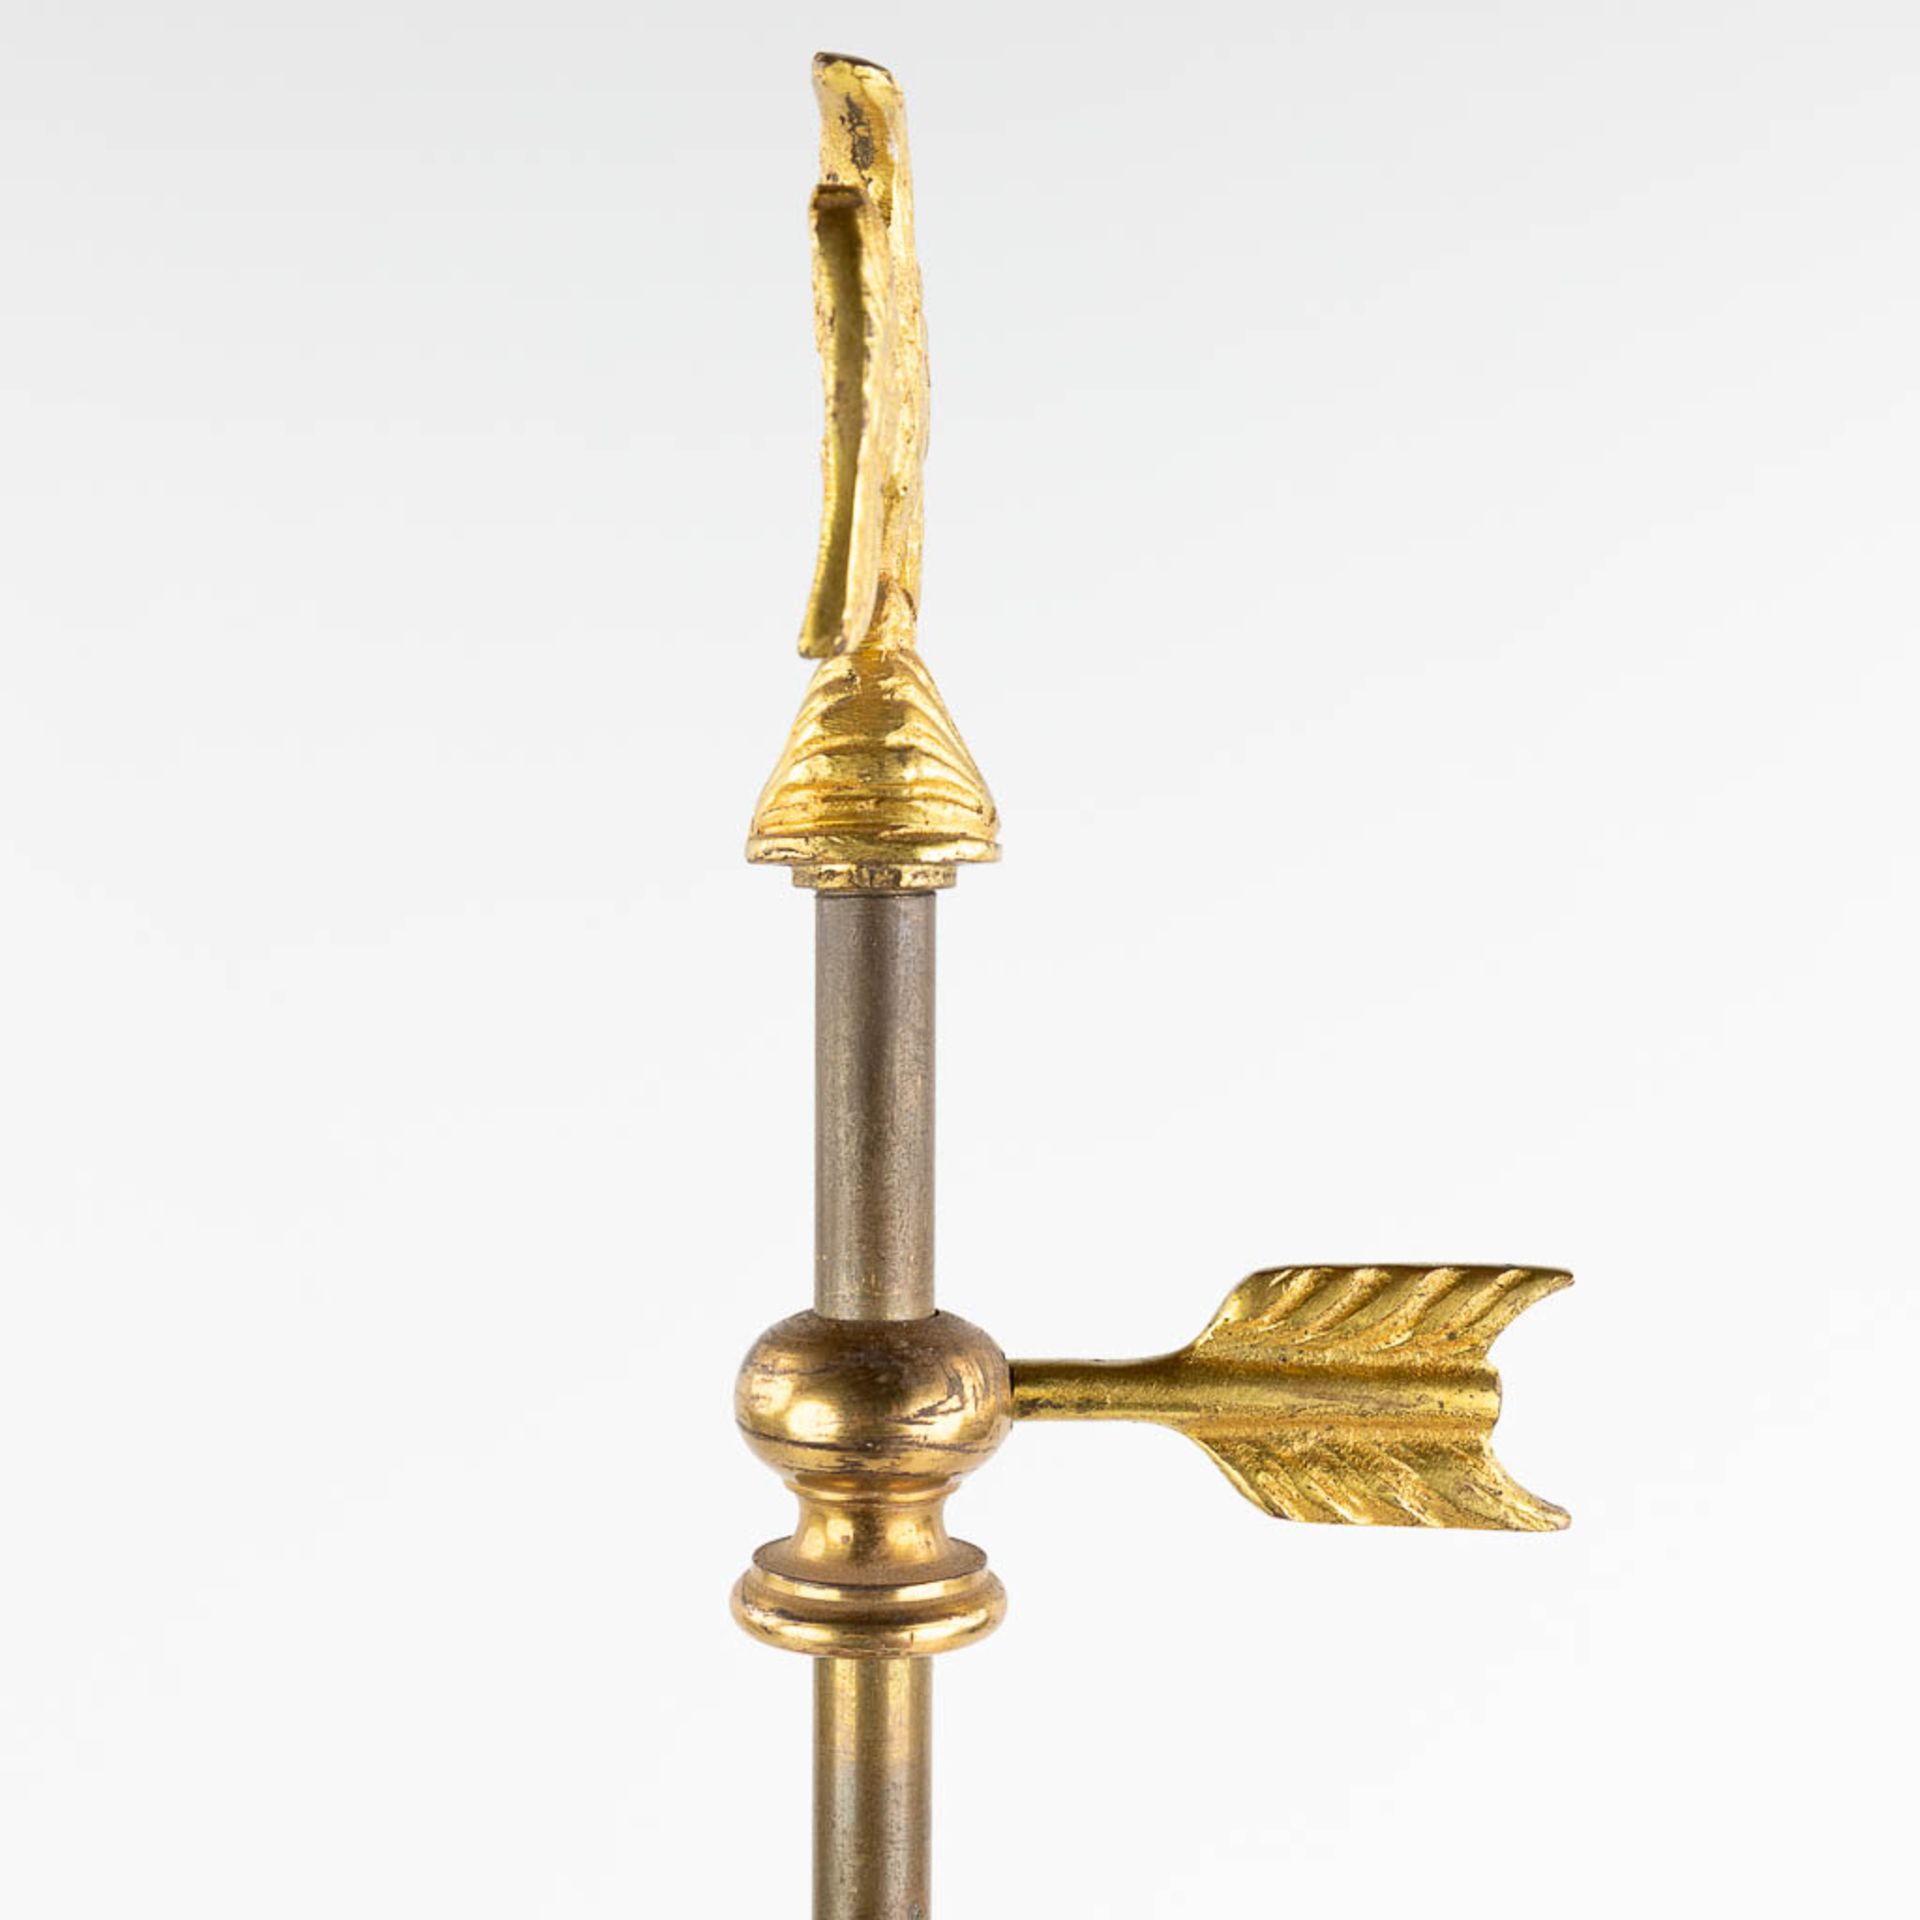 A table lamp, brass and onyx. 20th century. (L: 30 x W: 30 x H: 77 cm) - Image 9 of 13